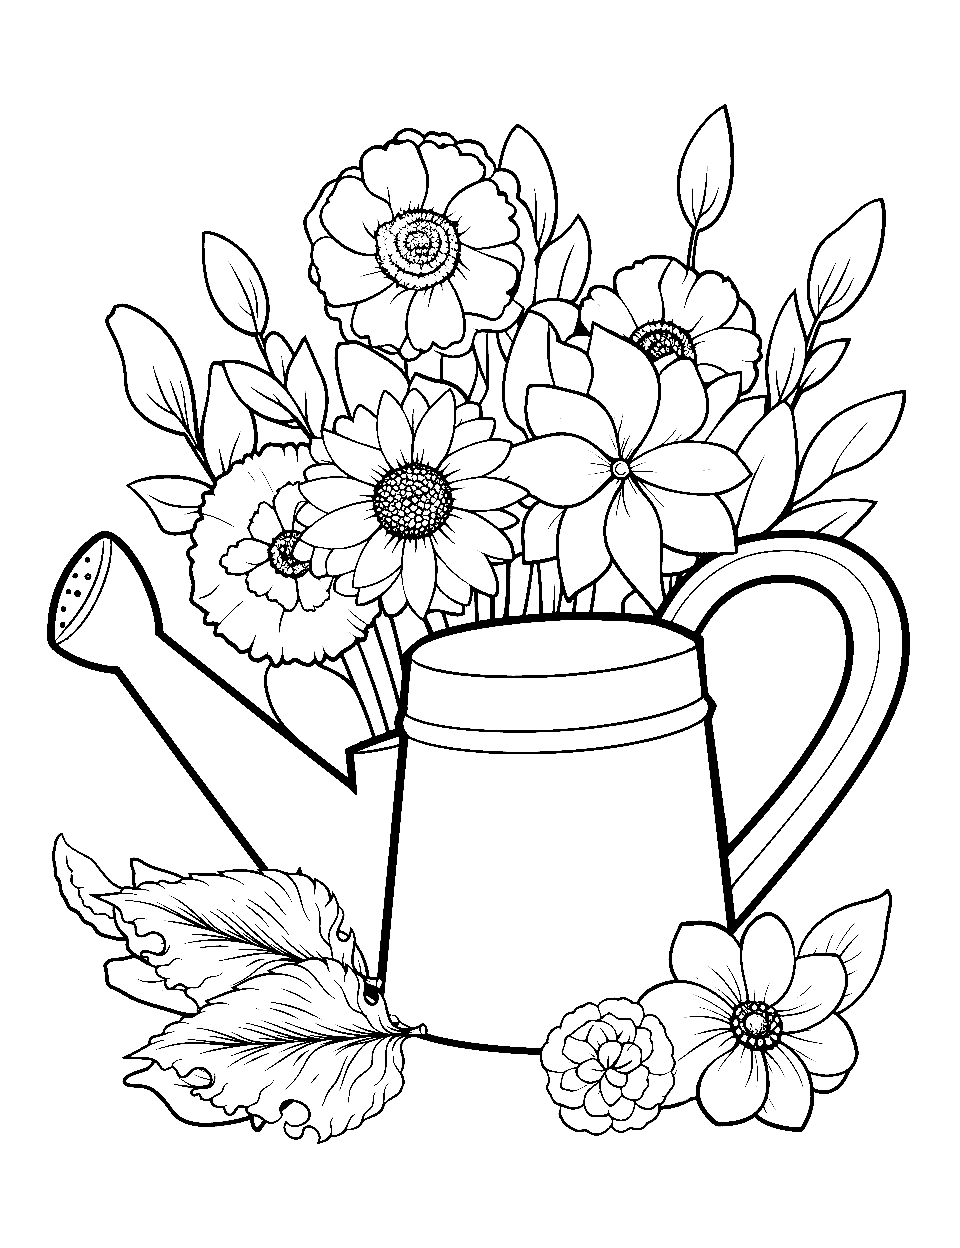 Garden Glee Coloring Page - A variety of flowers and a watering can.